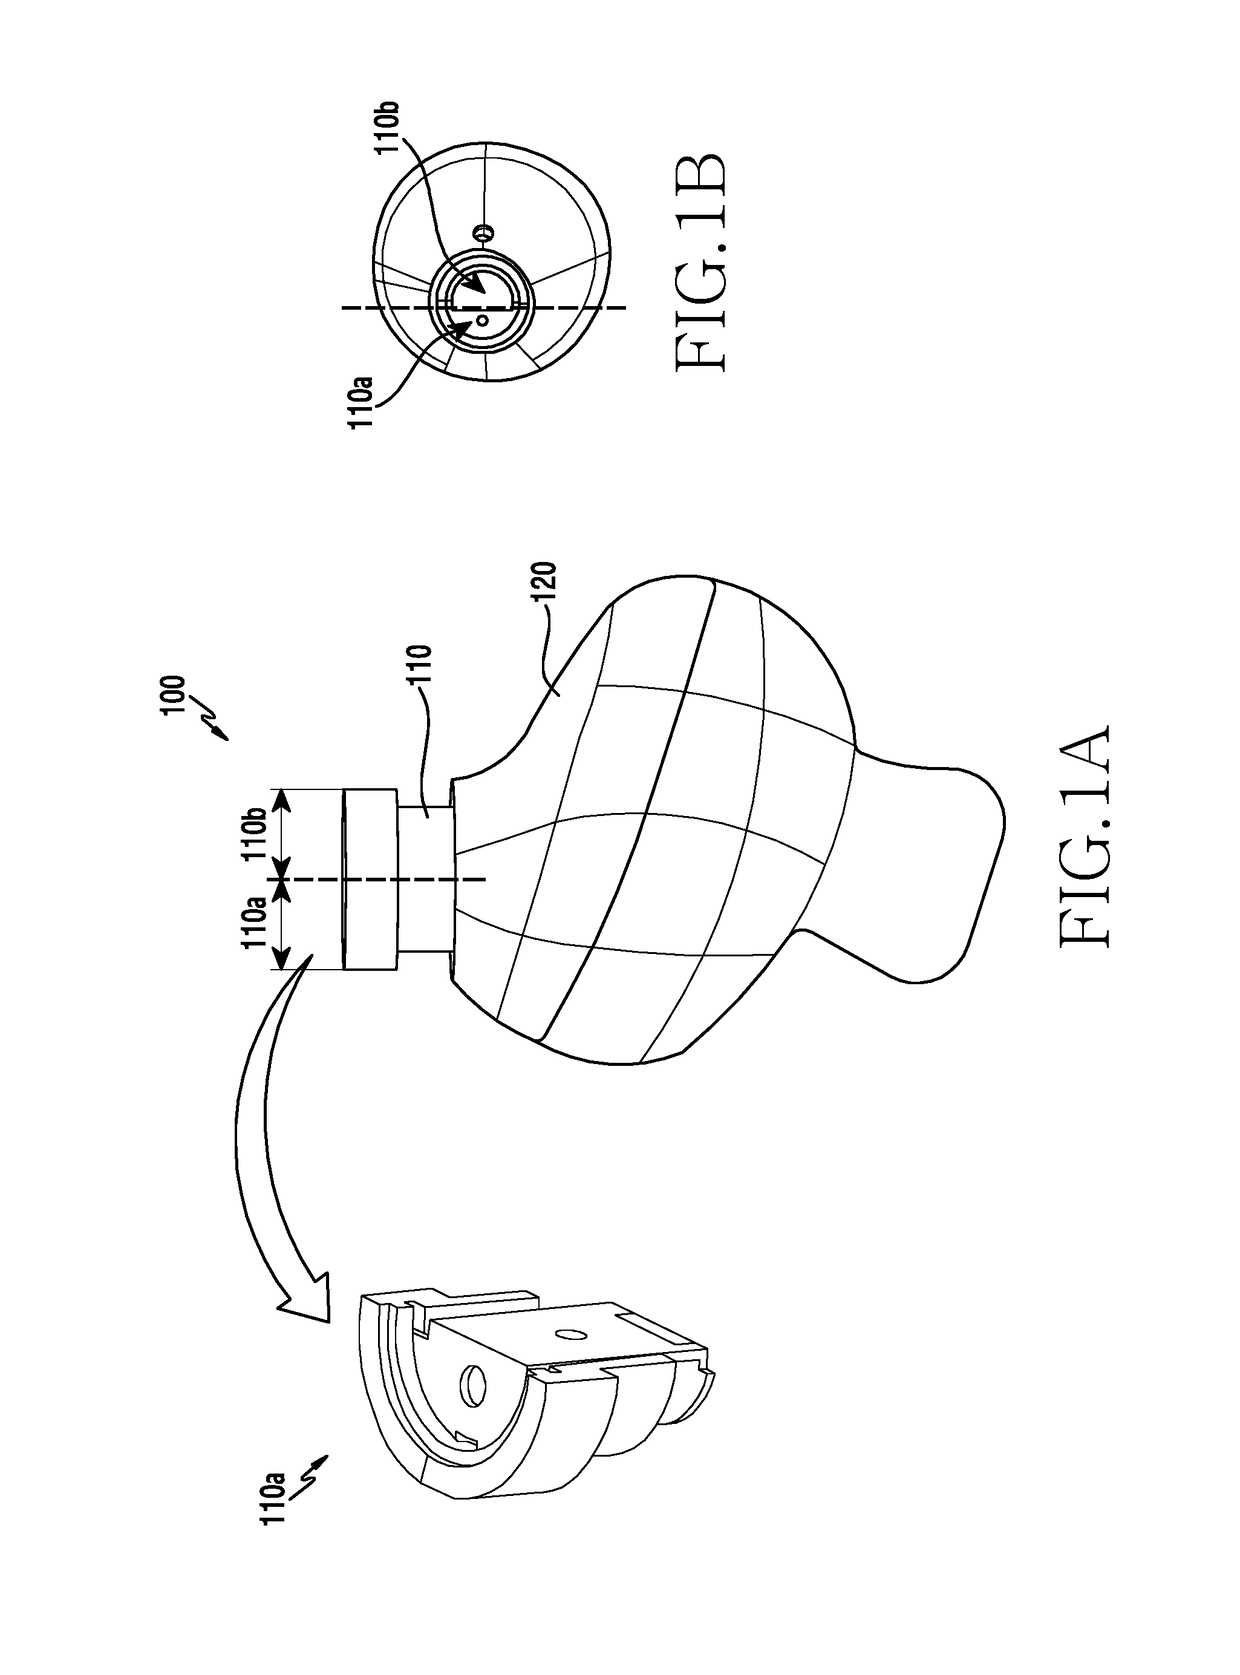 Wearable acoustic device with microphone